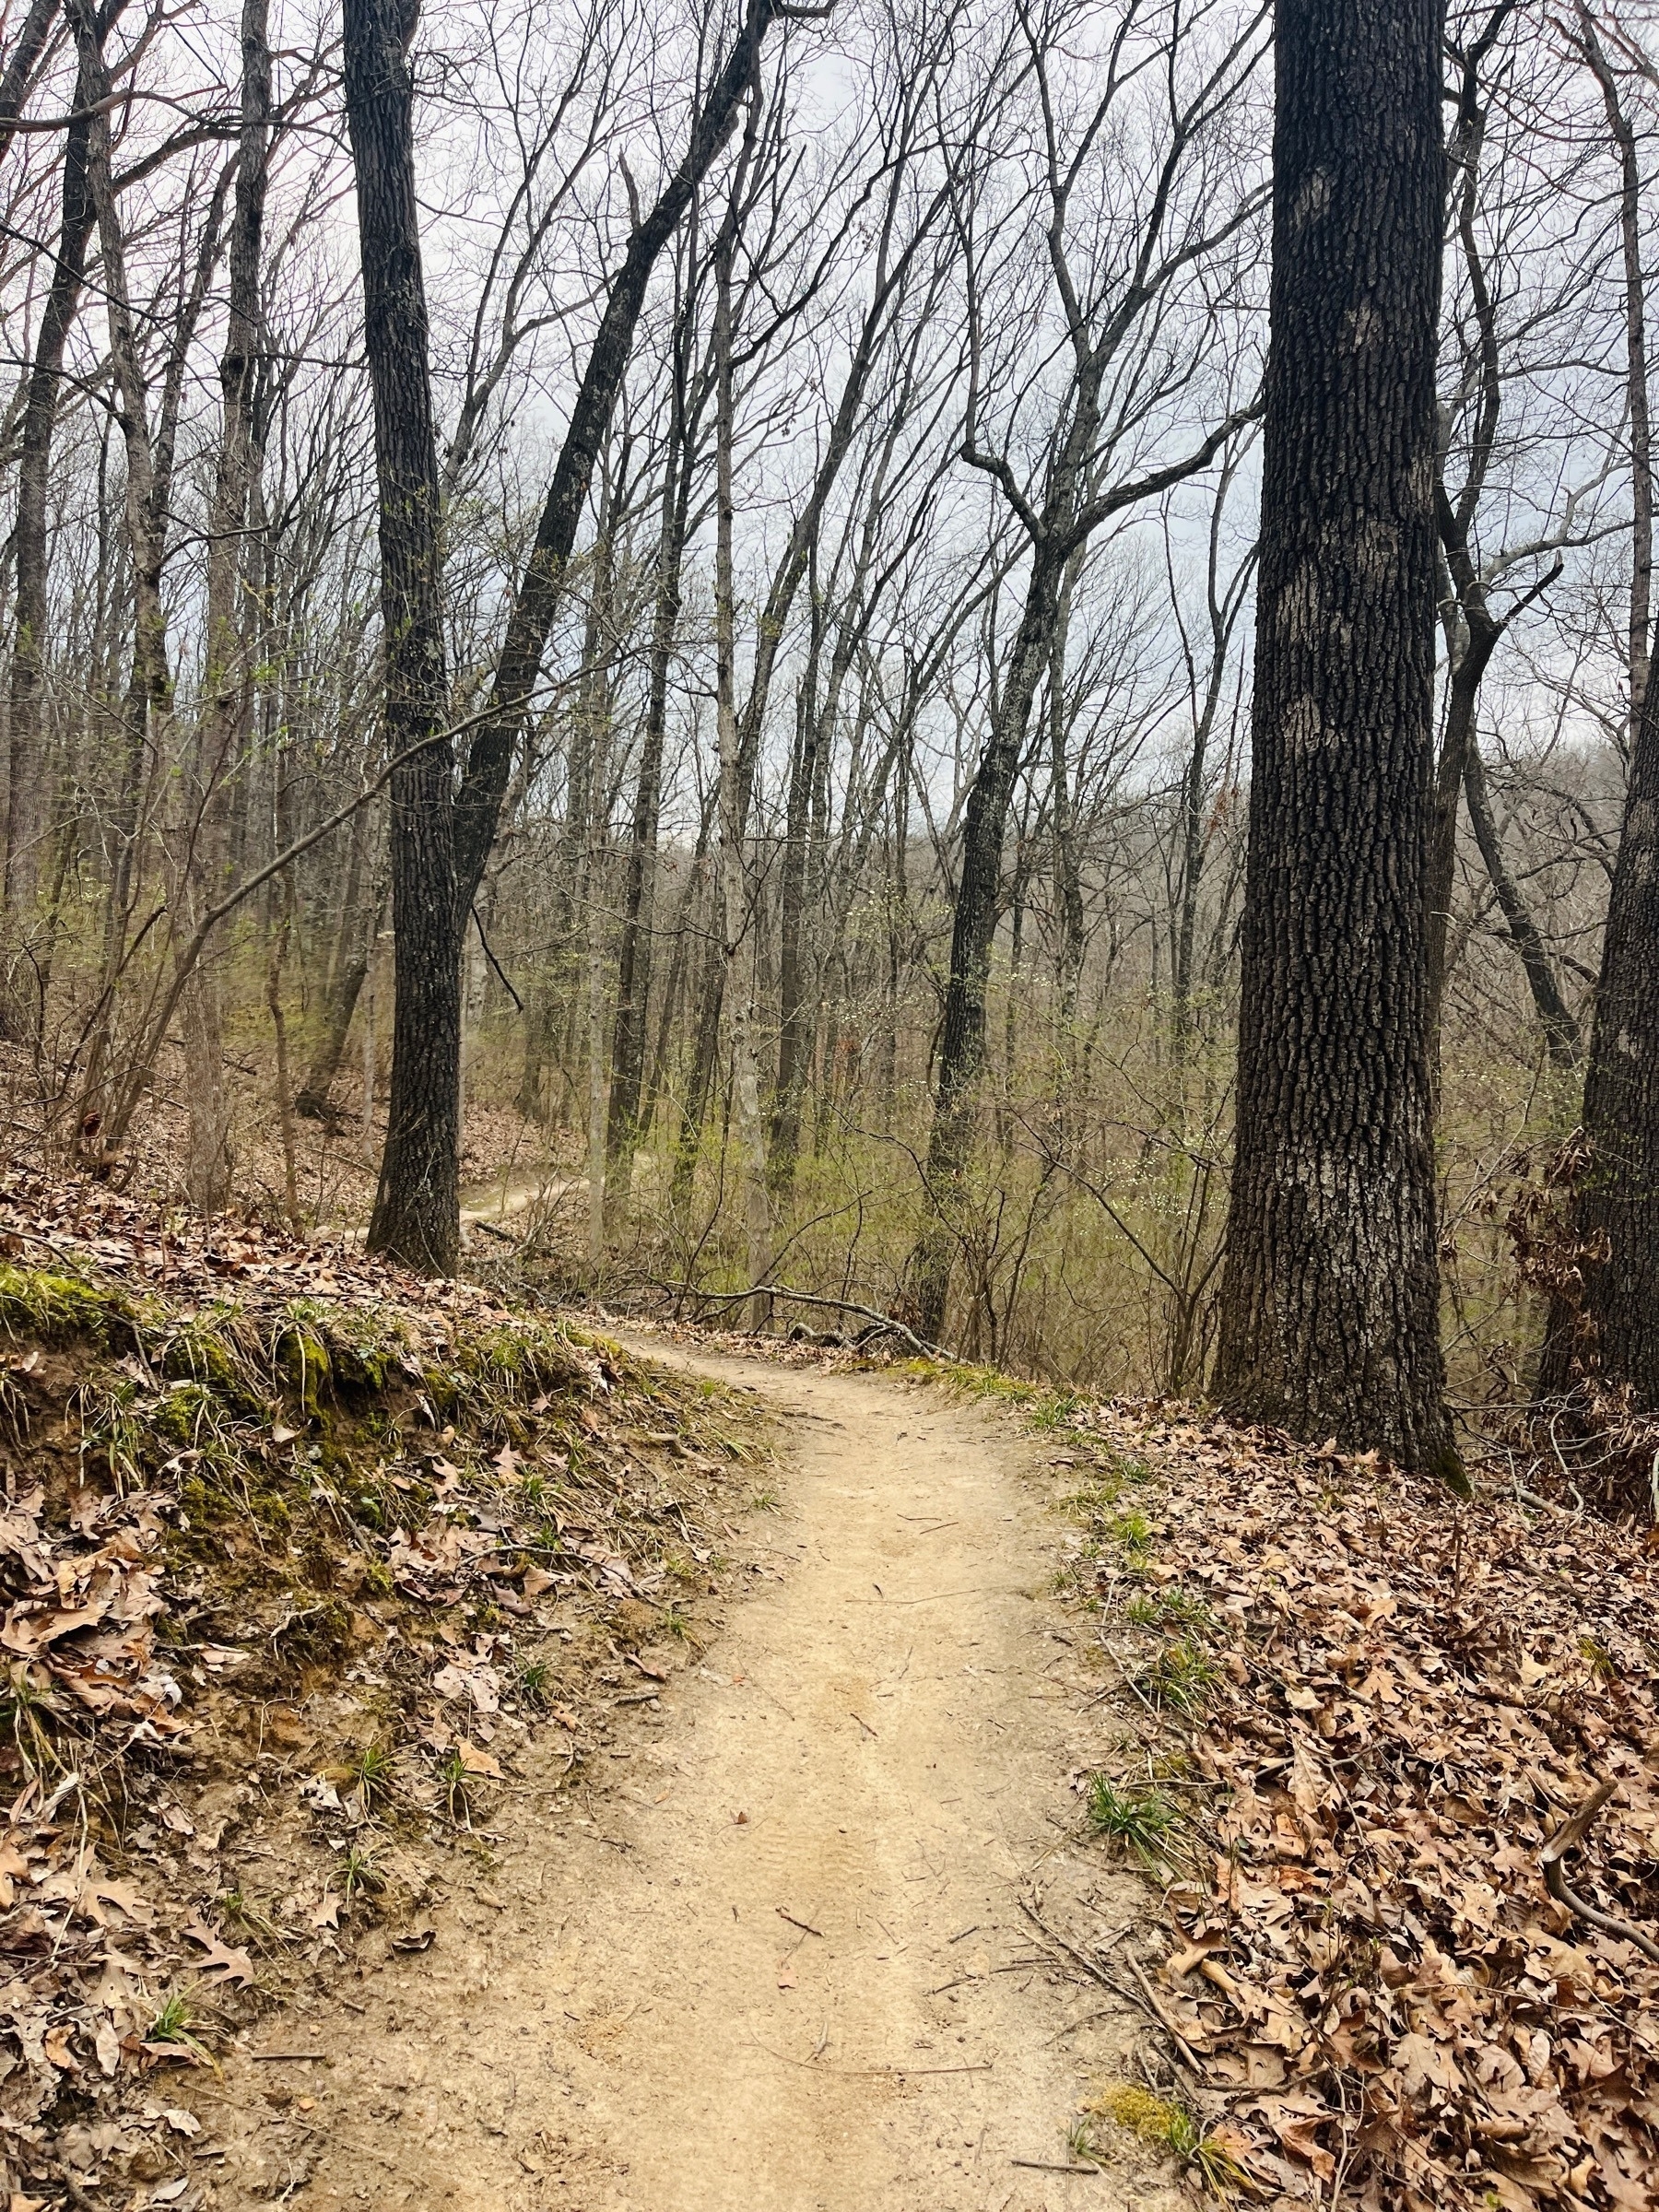 A dirt trail winds thru the woods, surrounded by deciduous trees with bare branches. A little spring grass grows